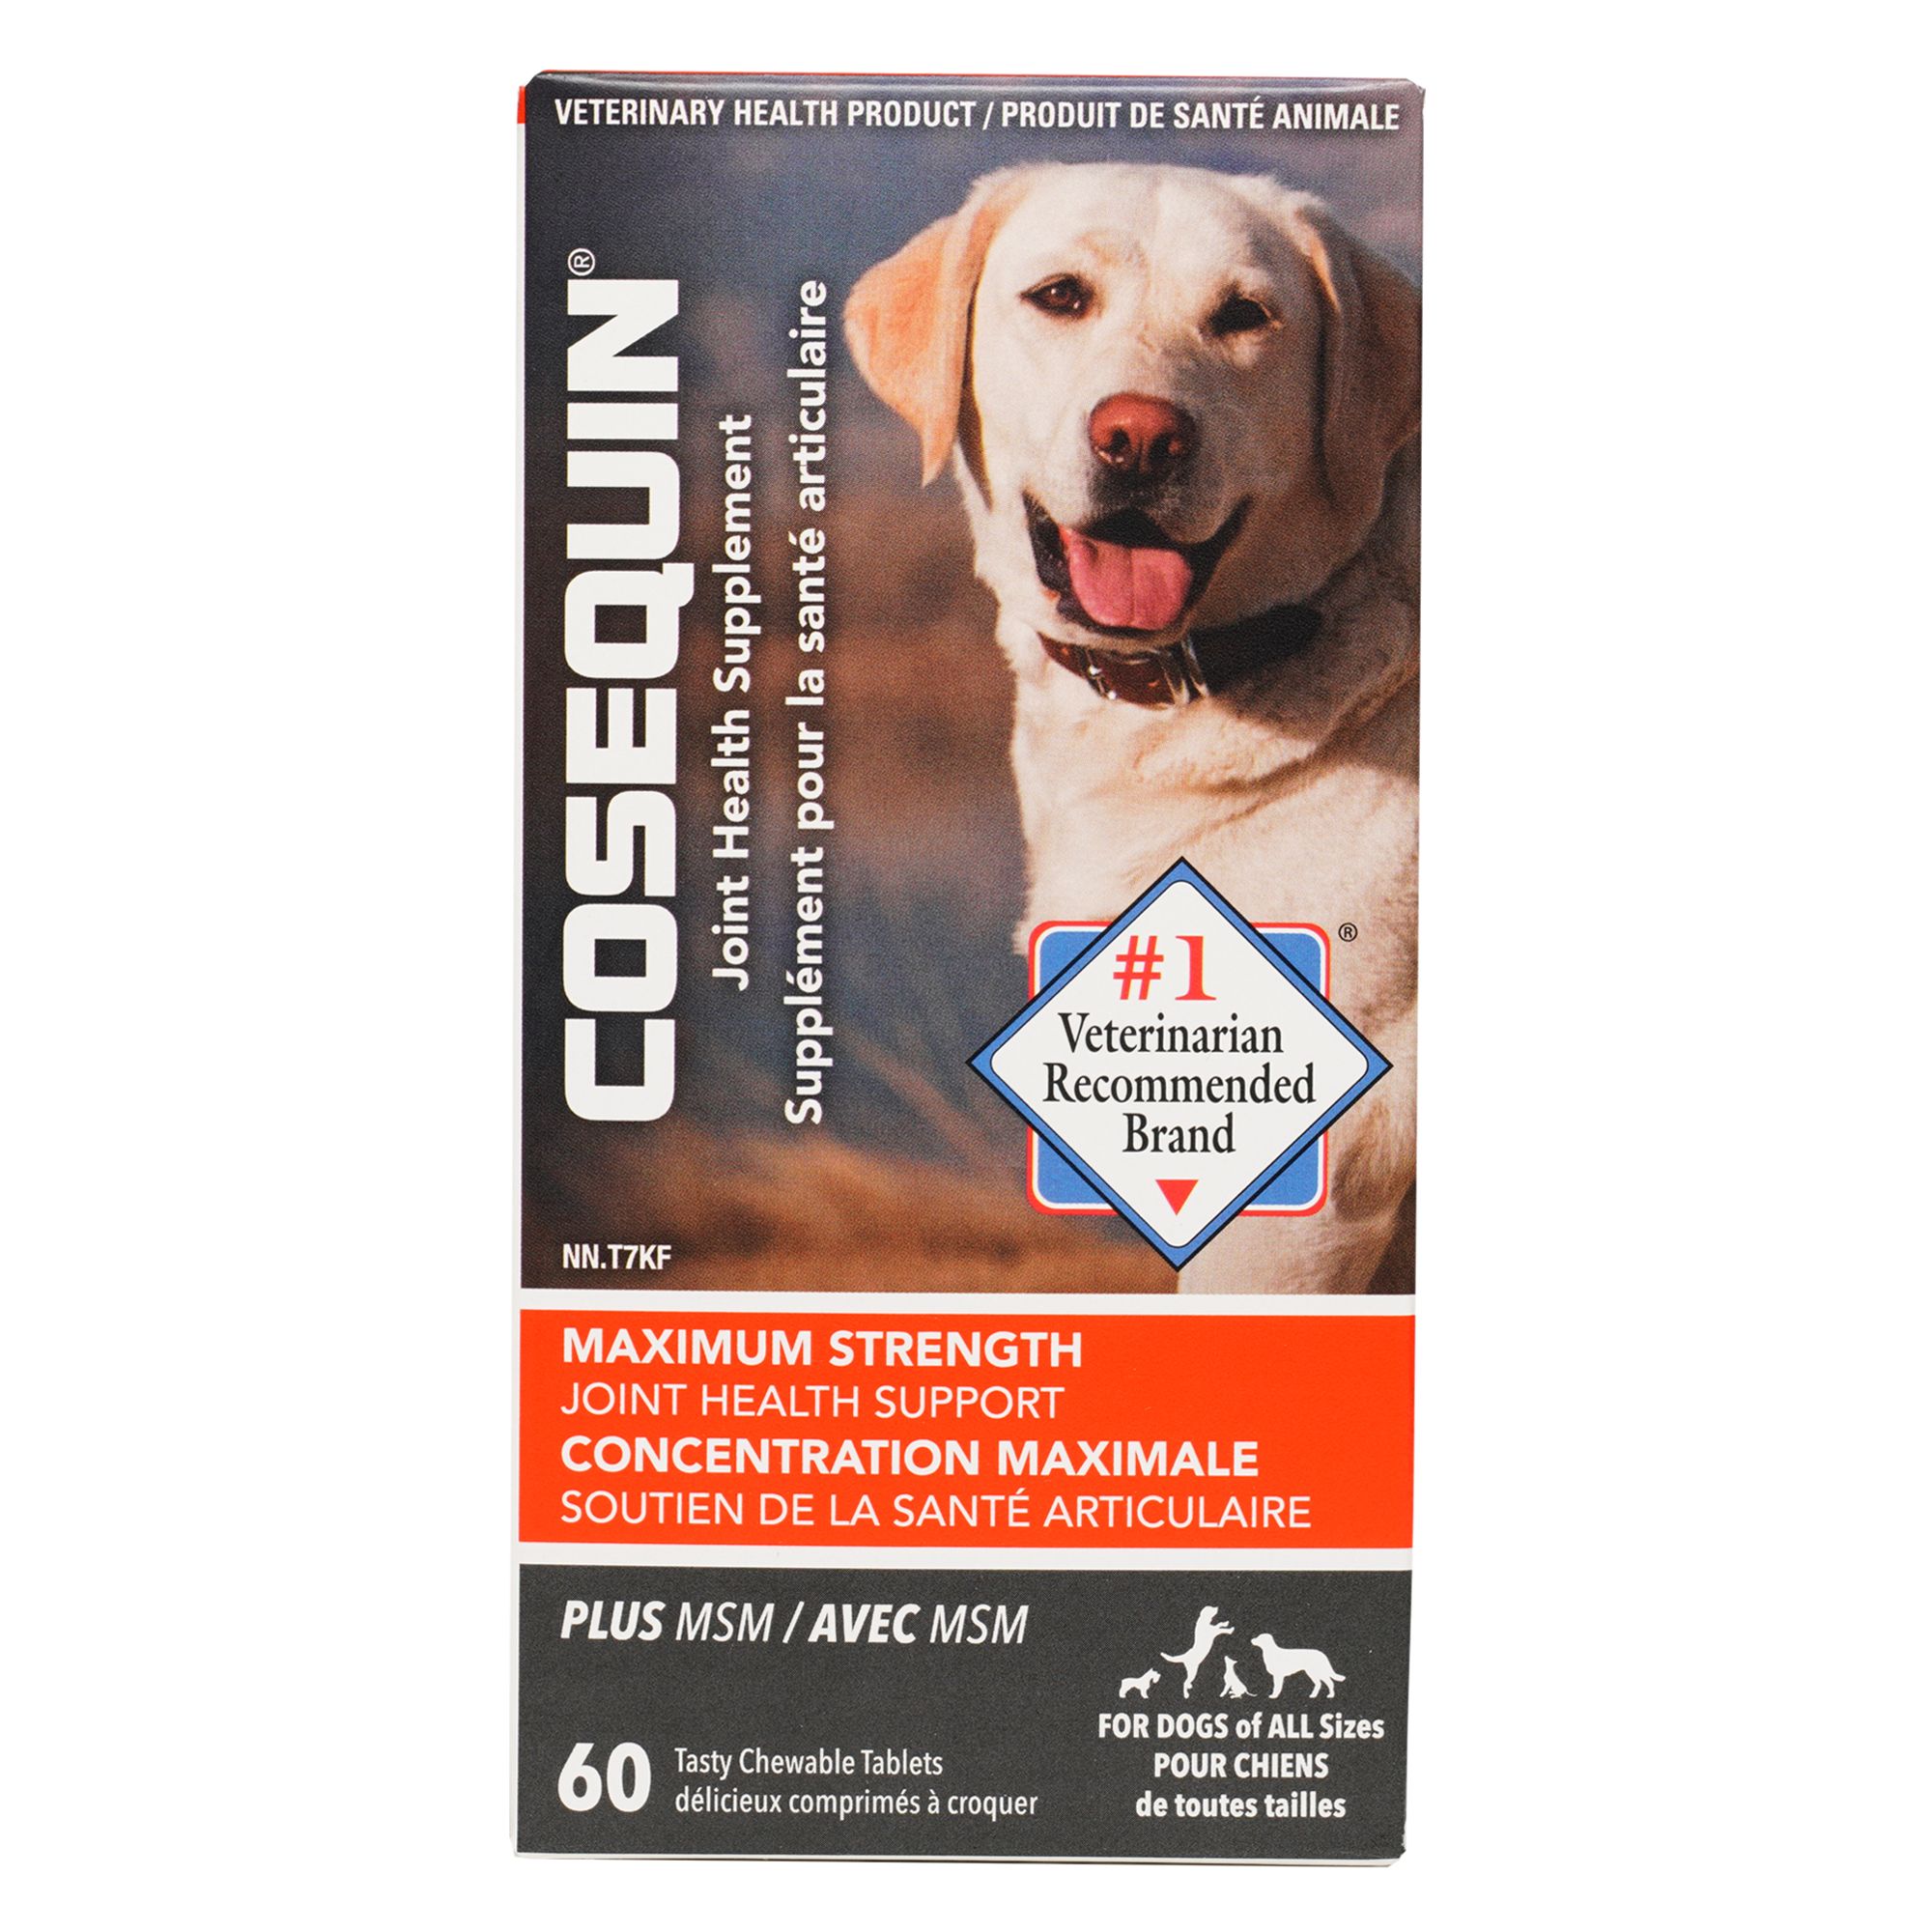 Cosequin For Dogs: Effective Joint Health Supplements For Dogs